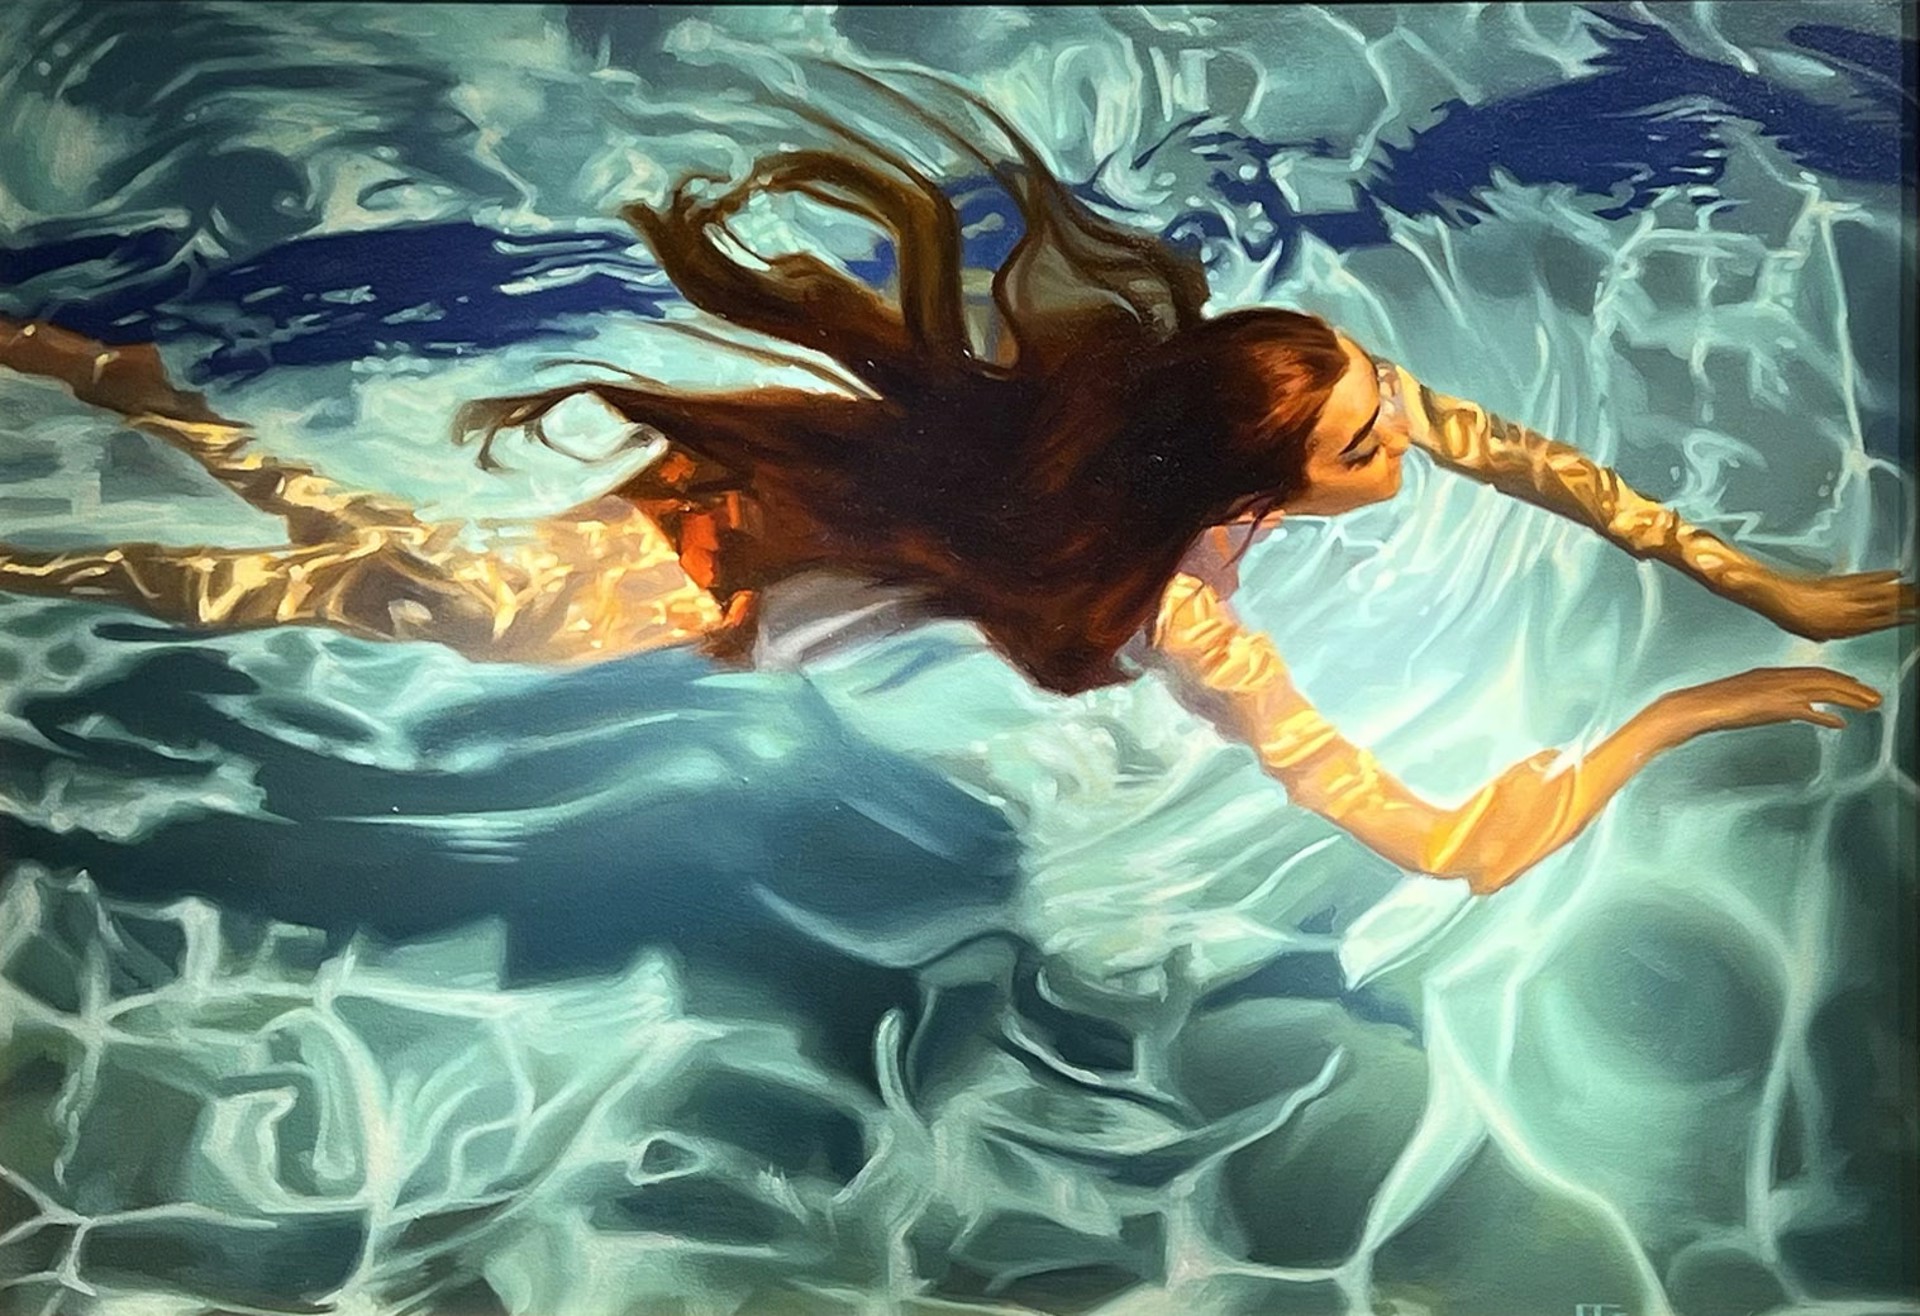 We're All Mermaids At Heart - Original by Carrie Graber